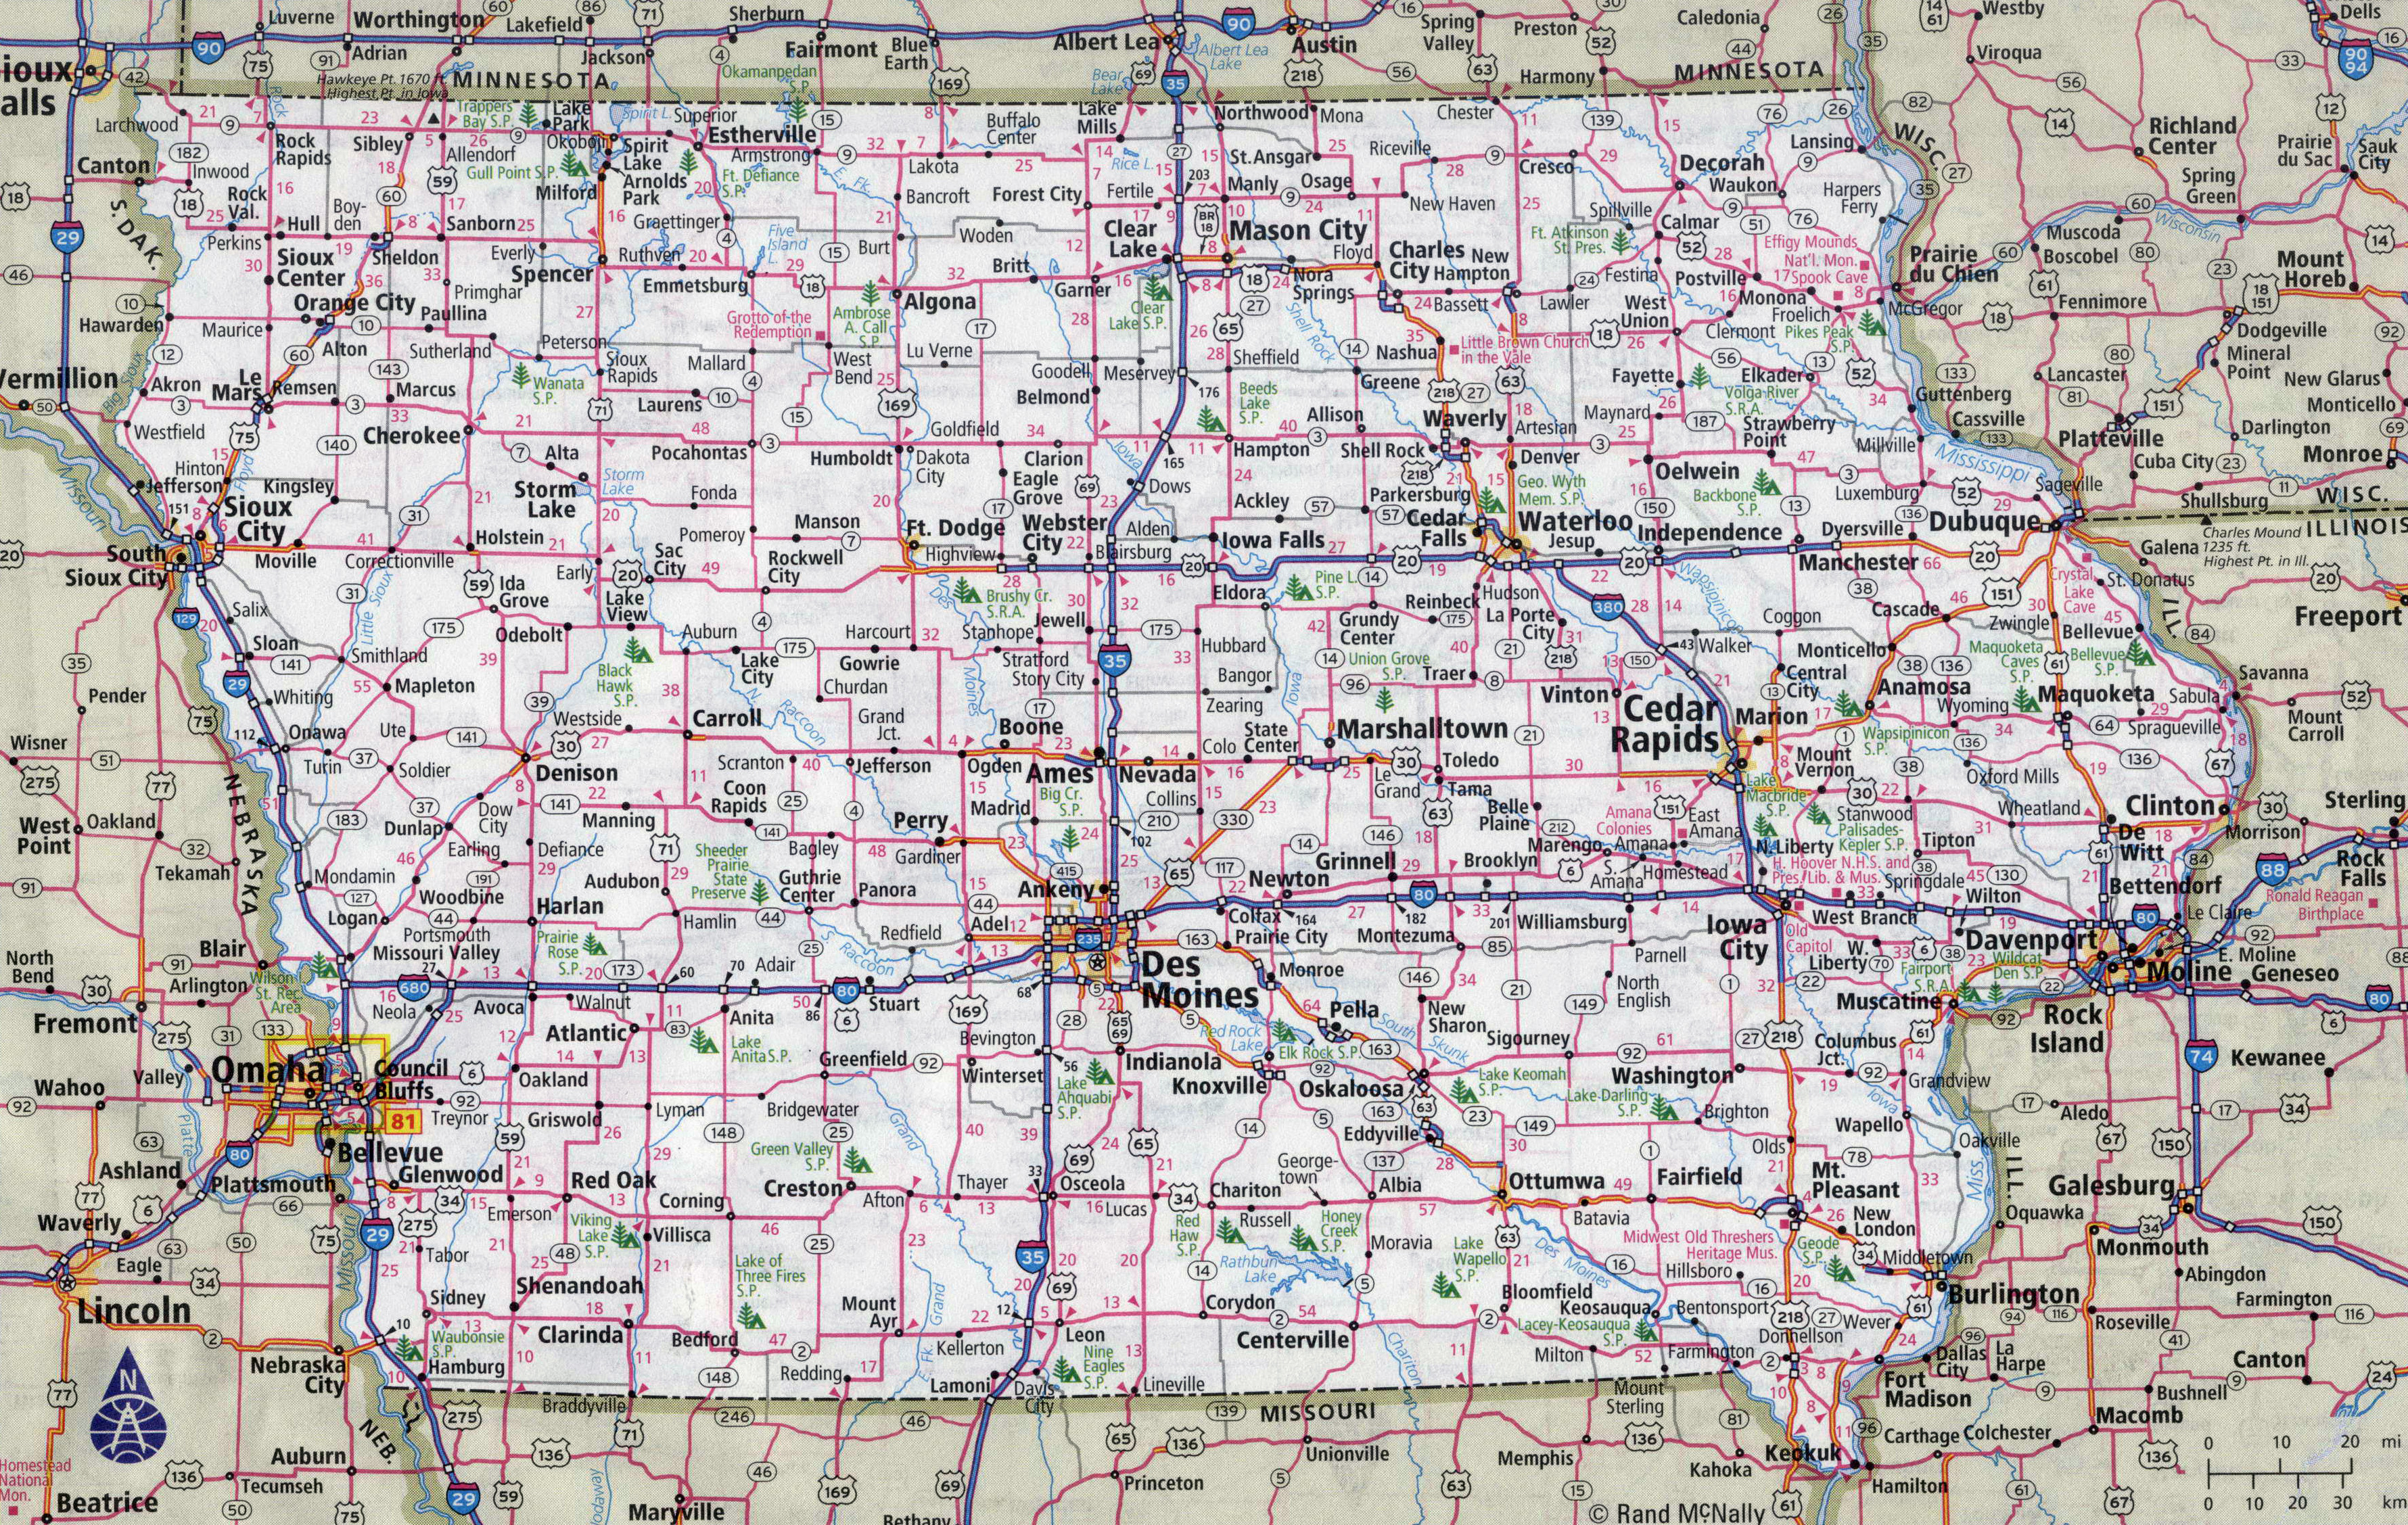 Large Detailed Roads And Highways Map Of Iowa State With All Cities Iowa State Usa Maps Of The Usa Maps Collection Of The United States Of America